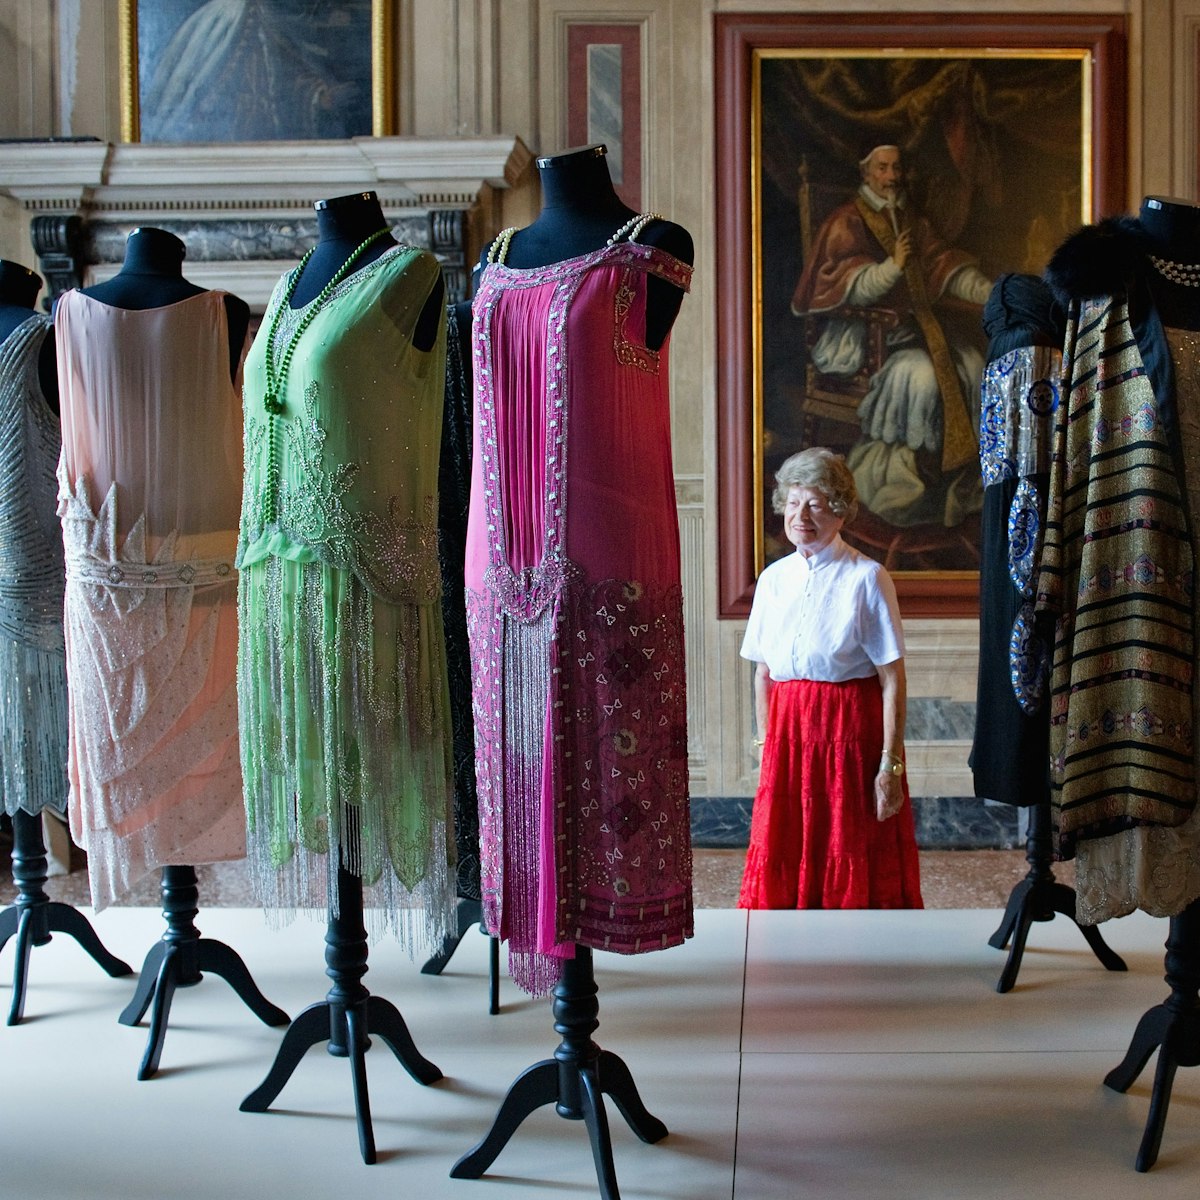 VENICE, ITALY - SEPTEMBER 16:  A woman admires some dresses  belonging to the collection of Alexander Vassiliev during the press preview of "Elegance in Exhile" at Palazzo Mocenigo on September 16, 2011 in Venice, Italy. "L'Eleganza in Esilio" tells the story of the cultural atmosphere and ambiance of the Russian elite at the beginning of 1900 and the international prestige of Djagilev's famous Russian Ballets.  (Photo by Marco Secchi/Getty Images)
125205363
Fashion, Human Interest
